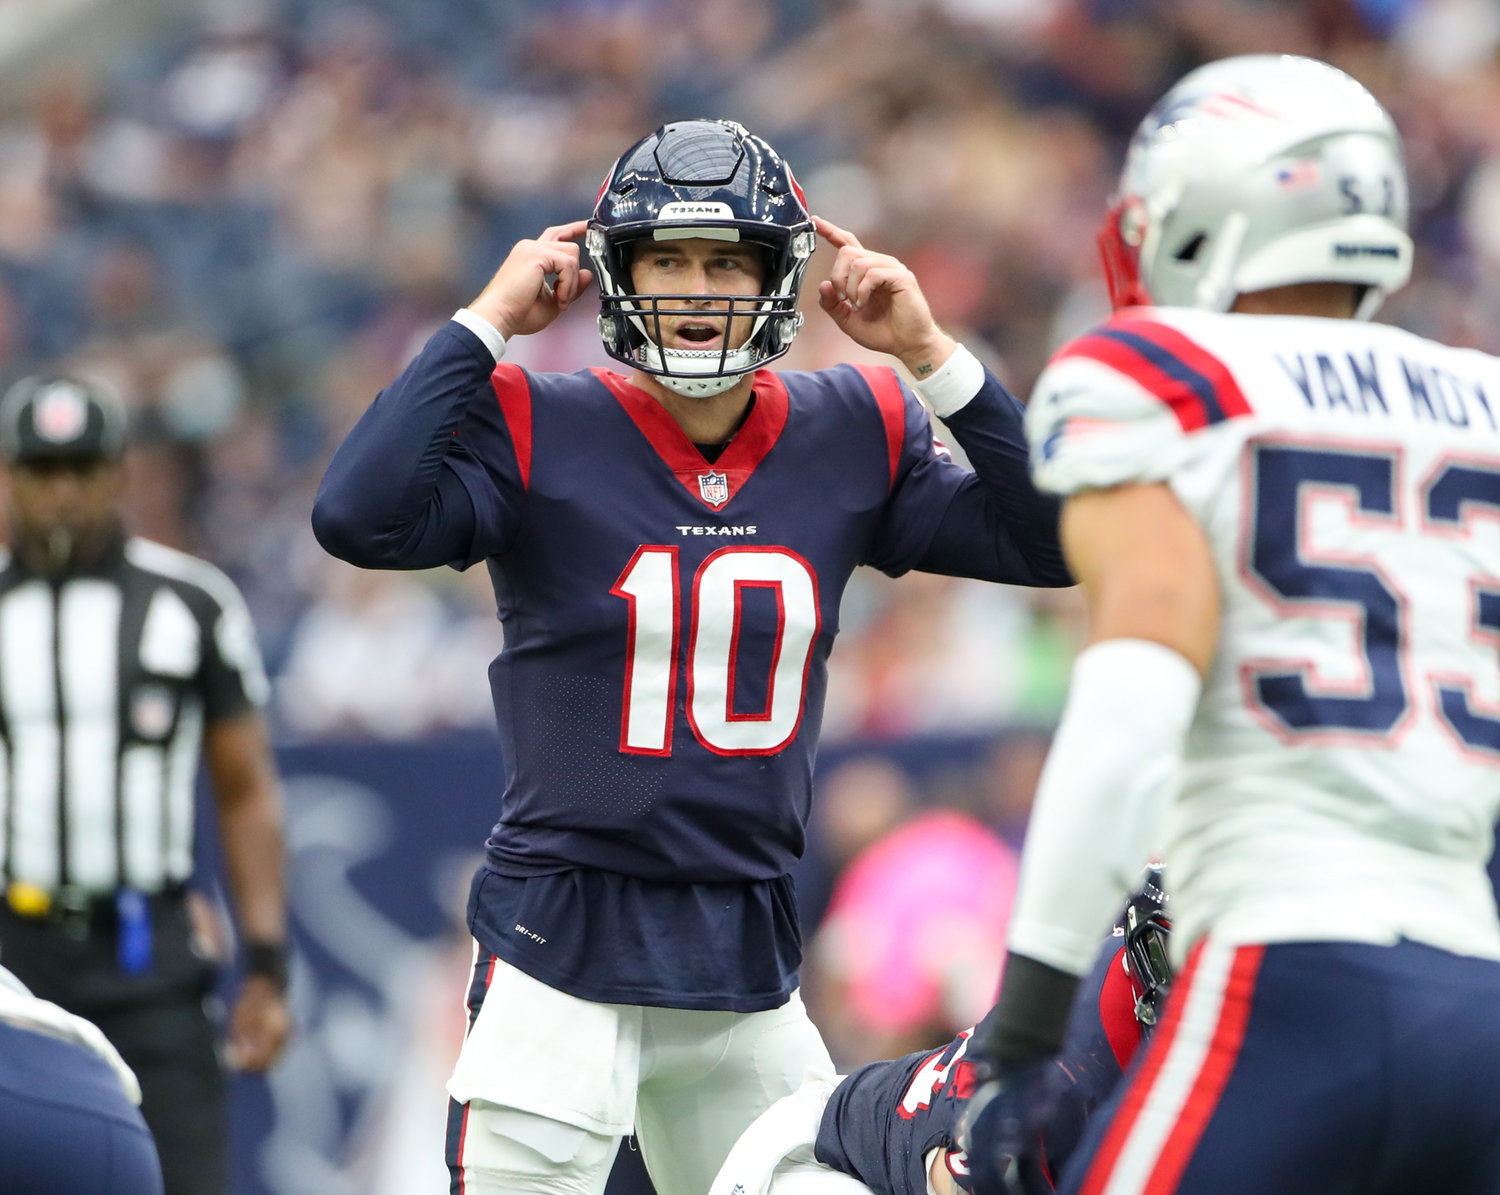 Houston Texans quarterback Davis Mills (10) calls signals before a snap during an NFL game between Houston and New England on October 10, 2021 in Houston, Texas. The Patriots won 25-22.